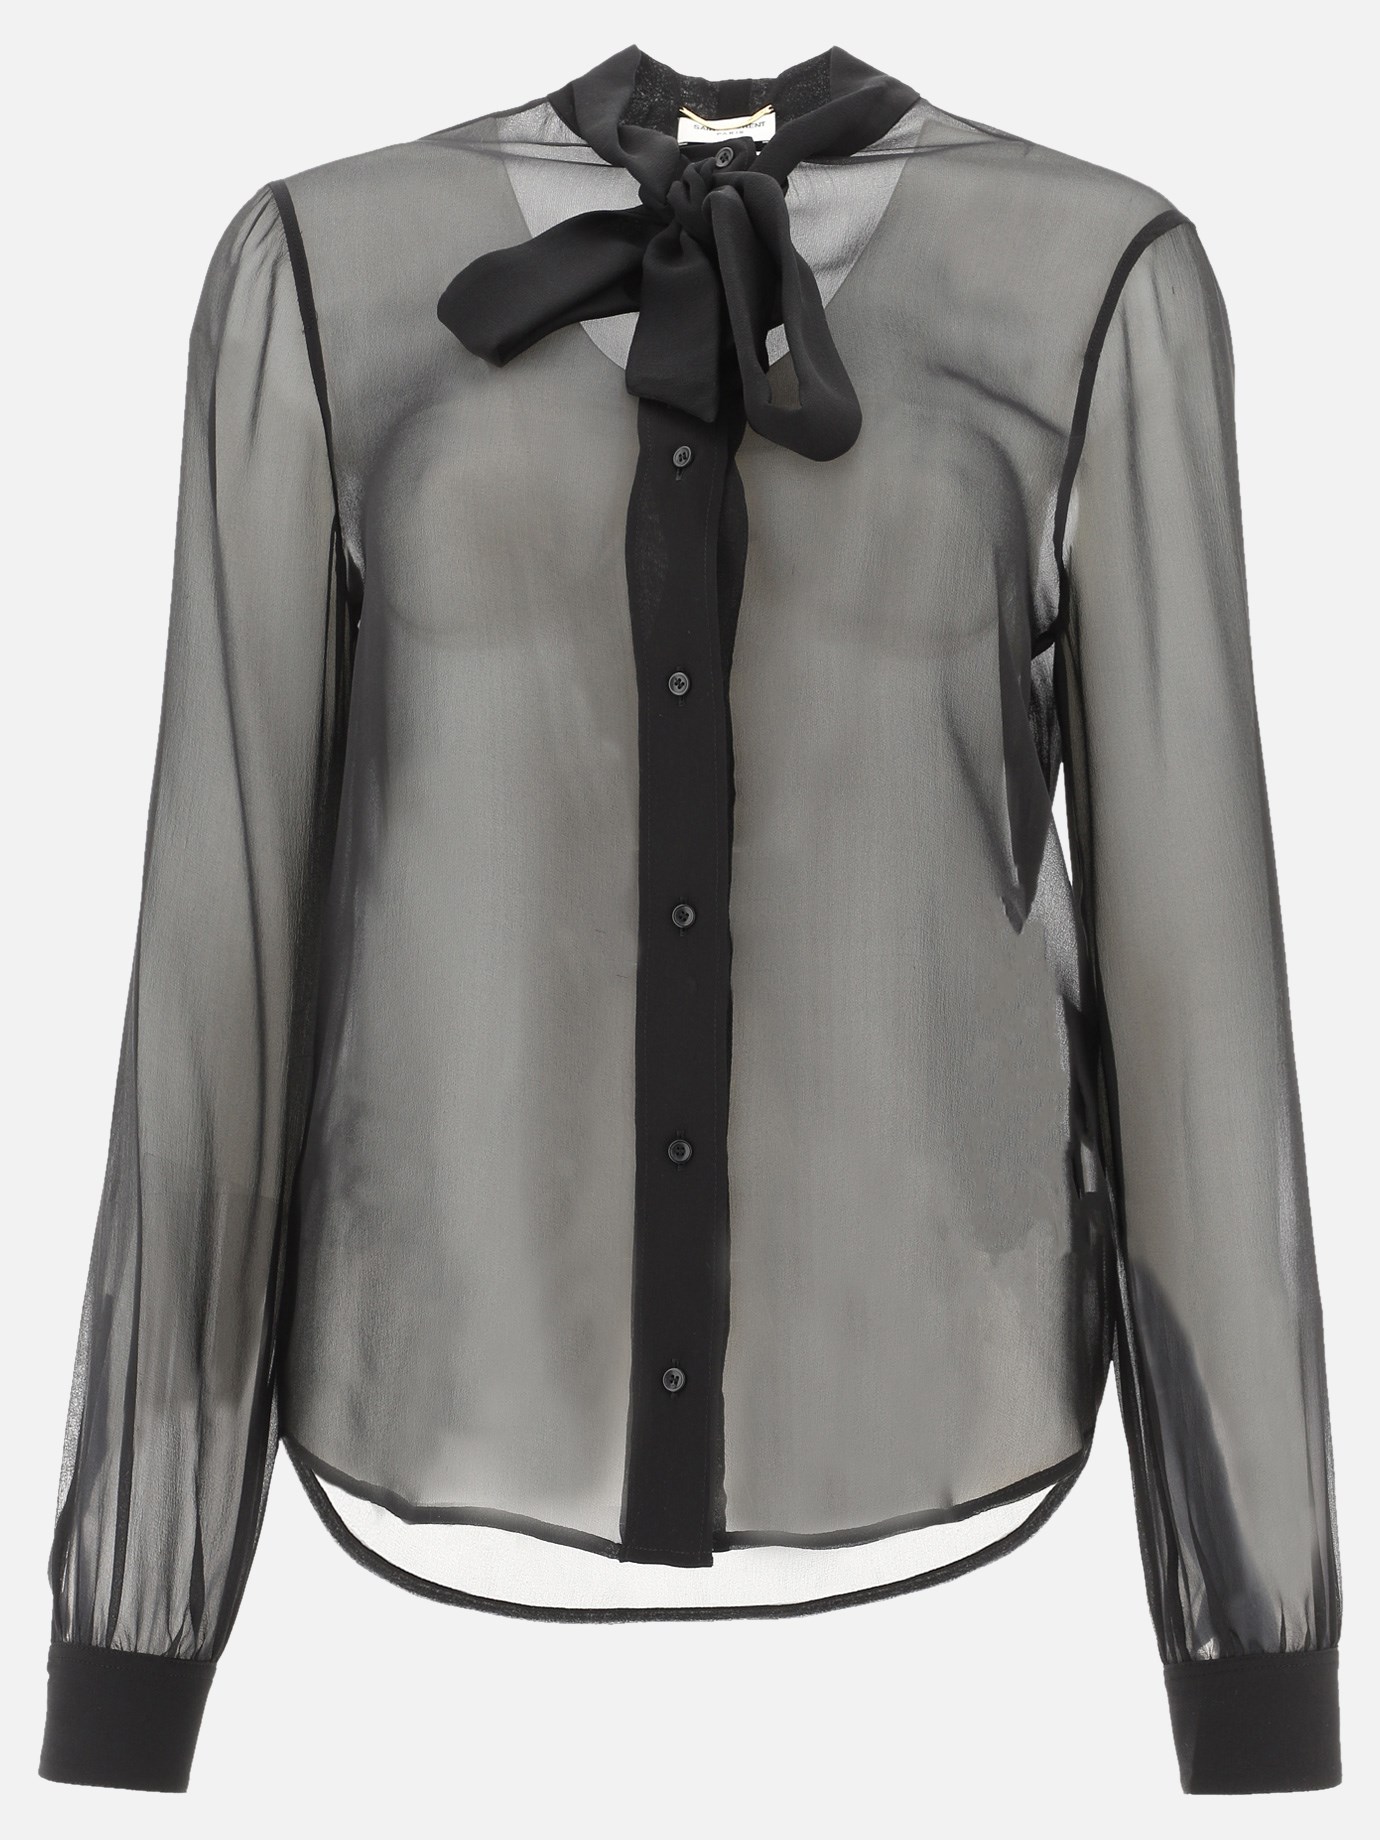 Blouse with bow by Saint Laurent